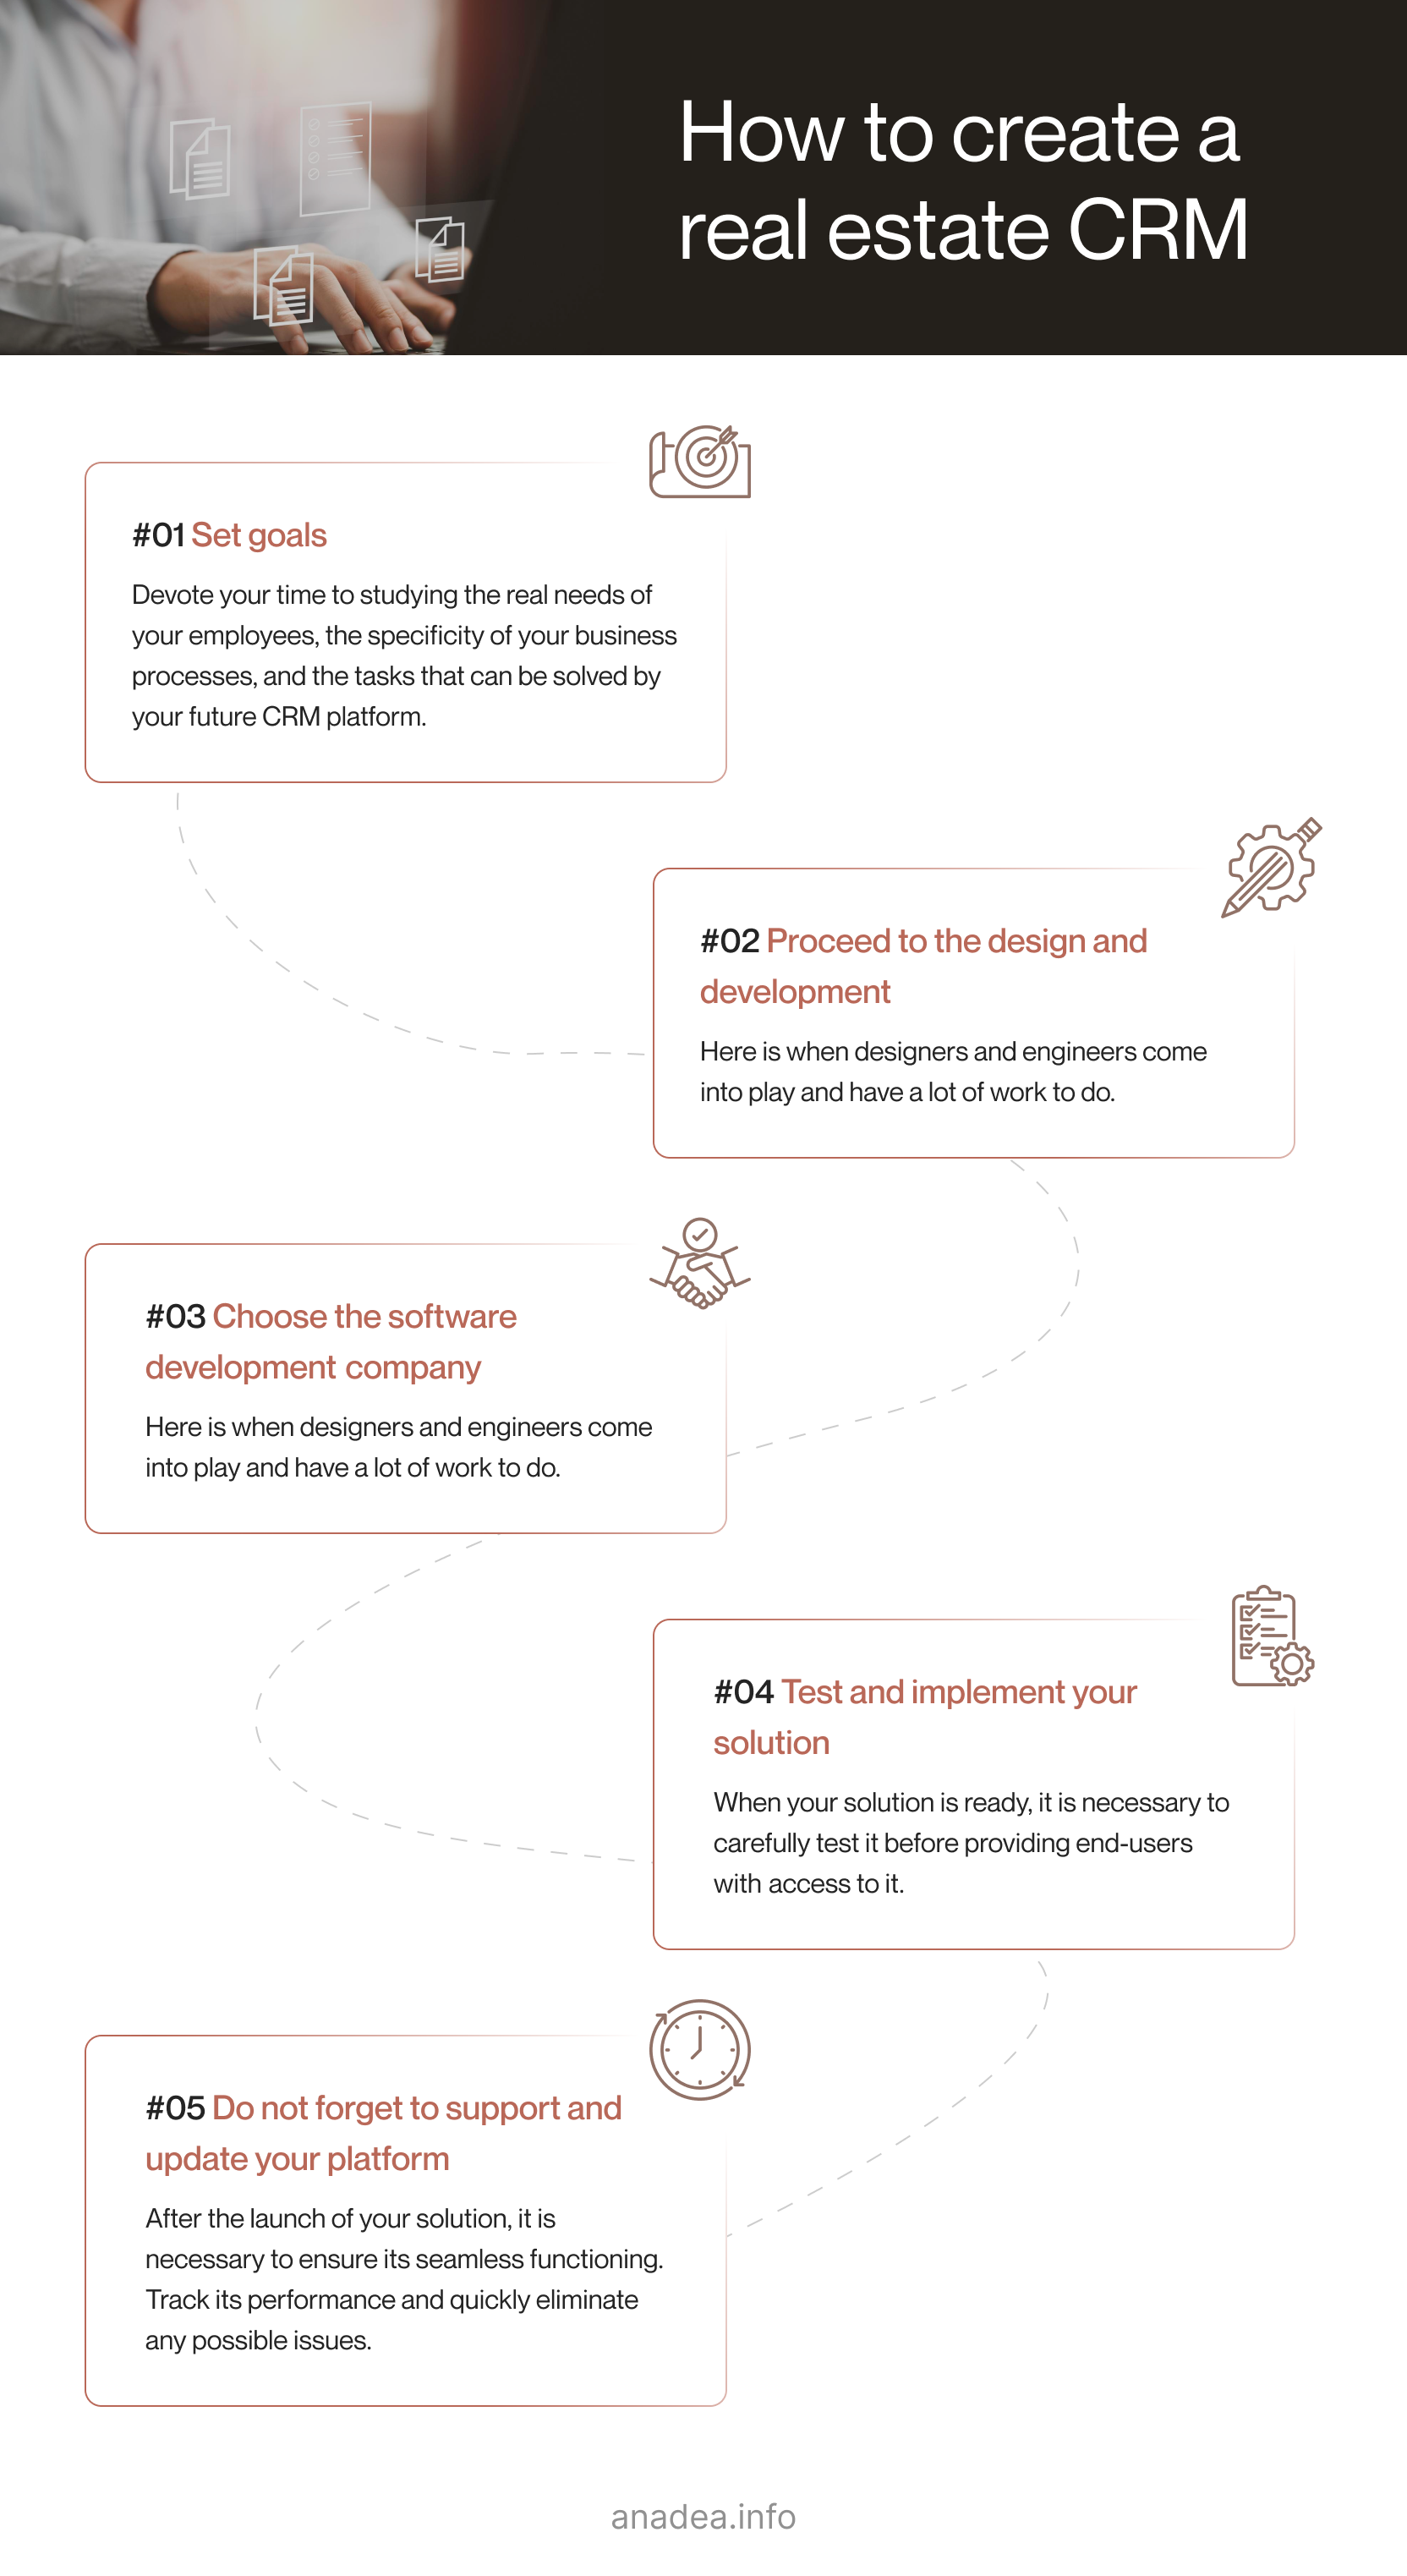 How to create a real estate CRM - Step-by-step infographic